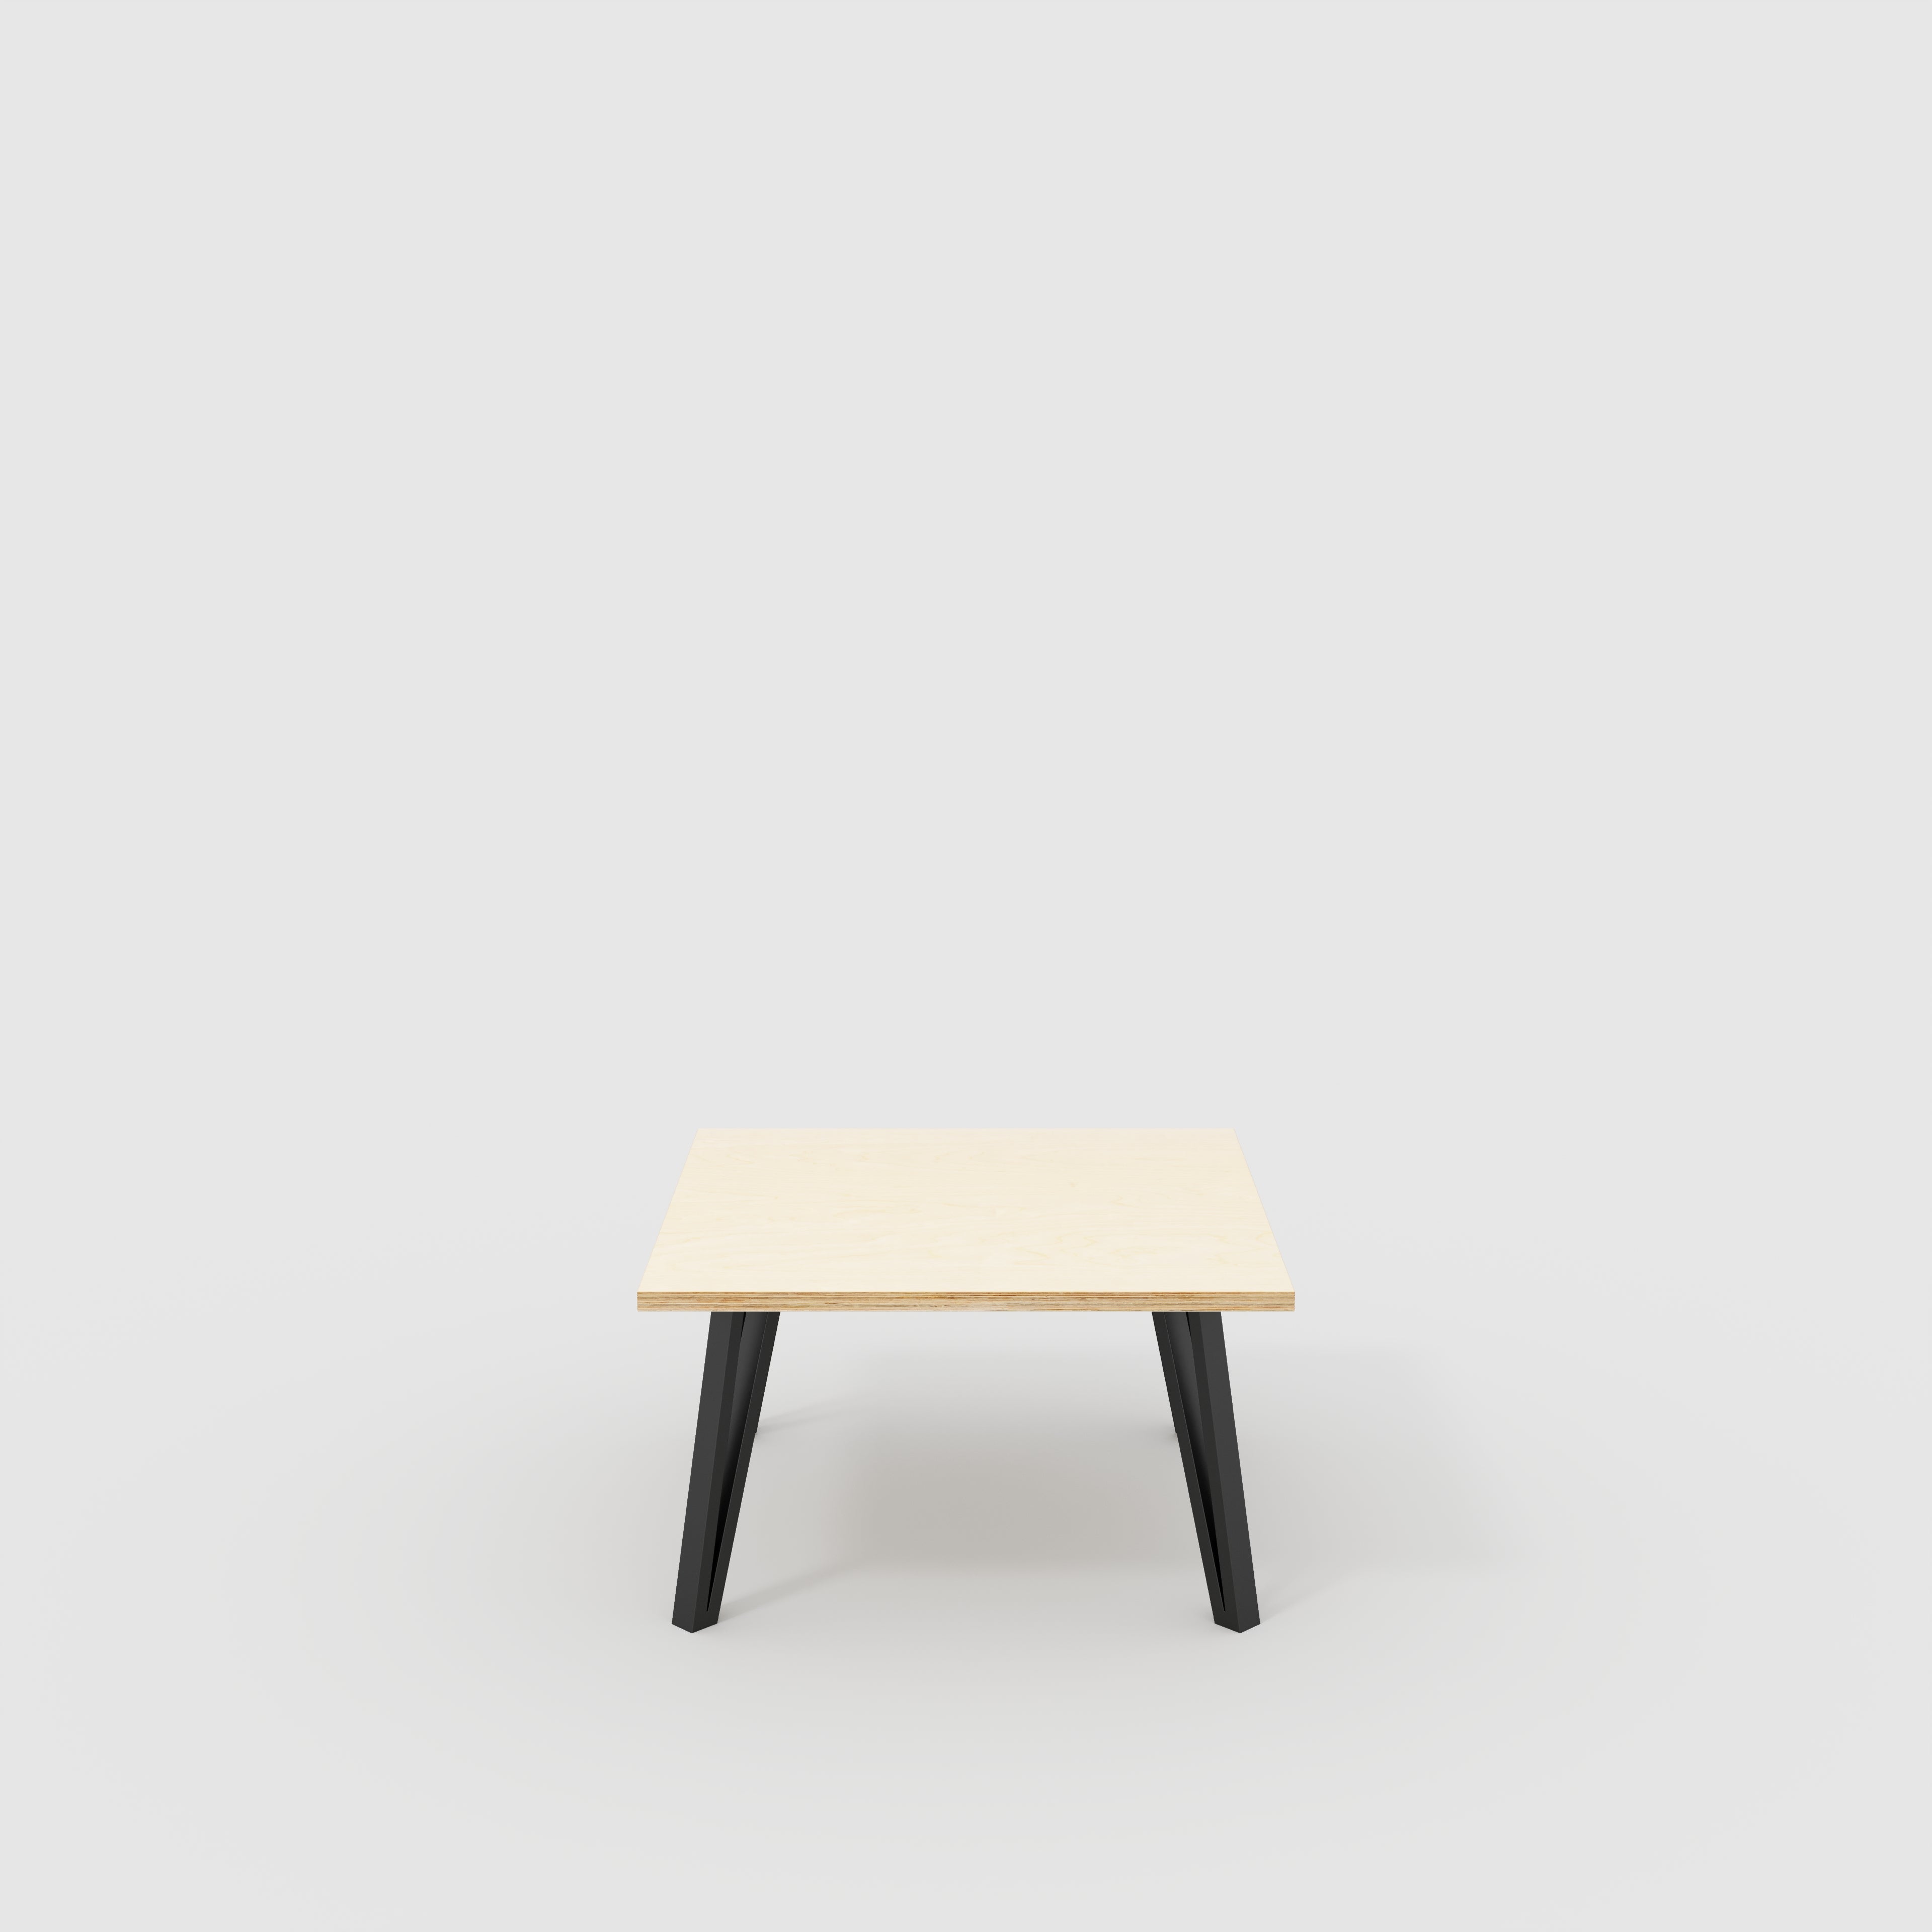 Coffee Table with Black Box Hairpin Legs - Plywood Birch - 800(w) x 800(d) x 425(h)